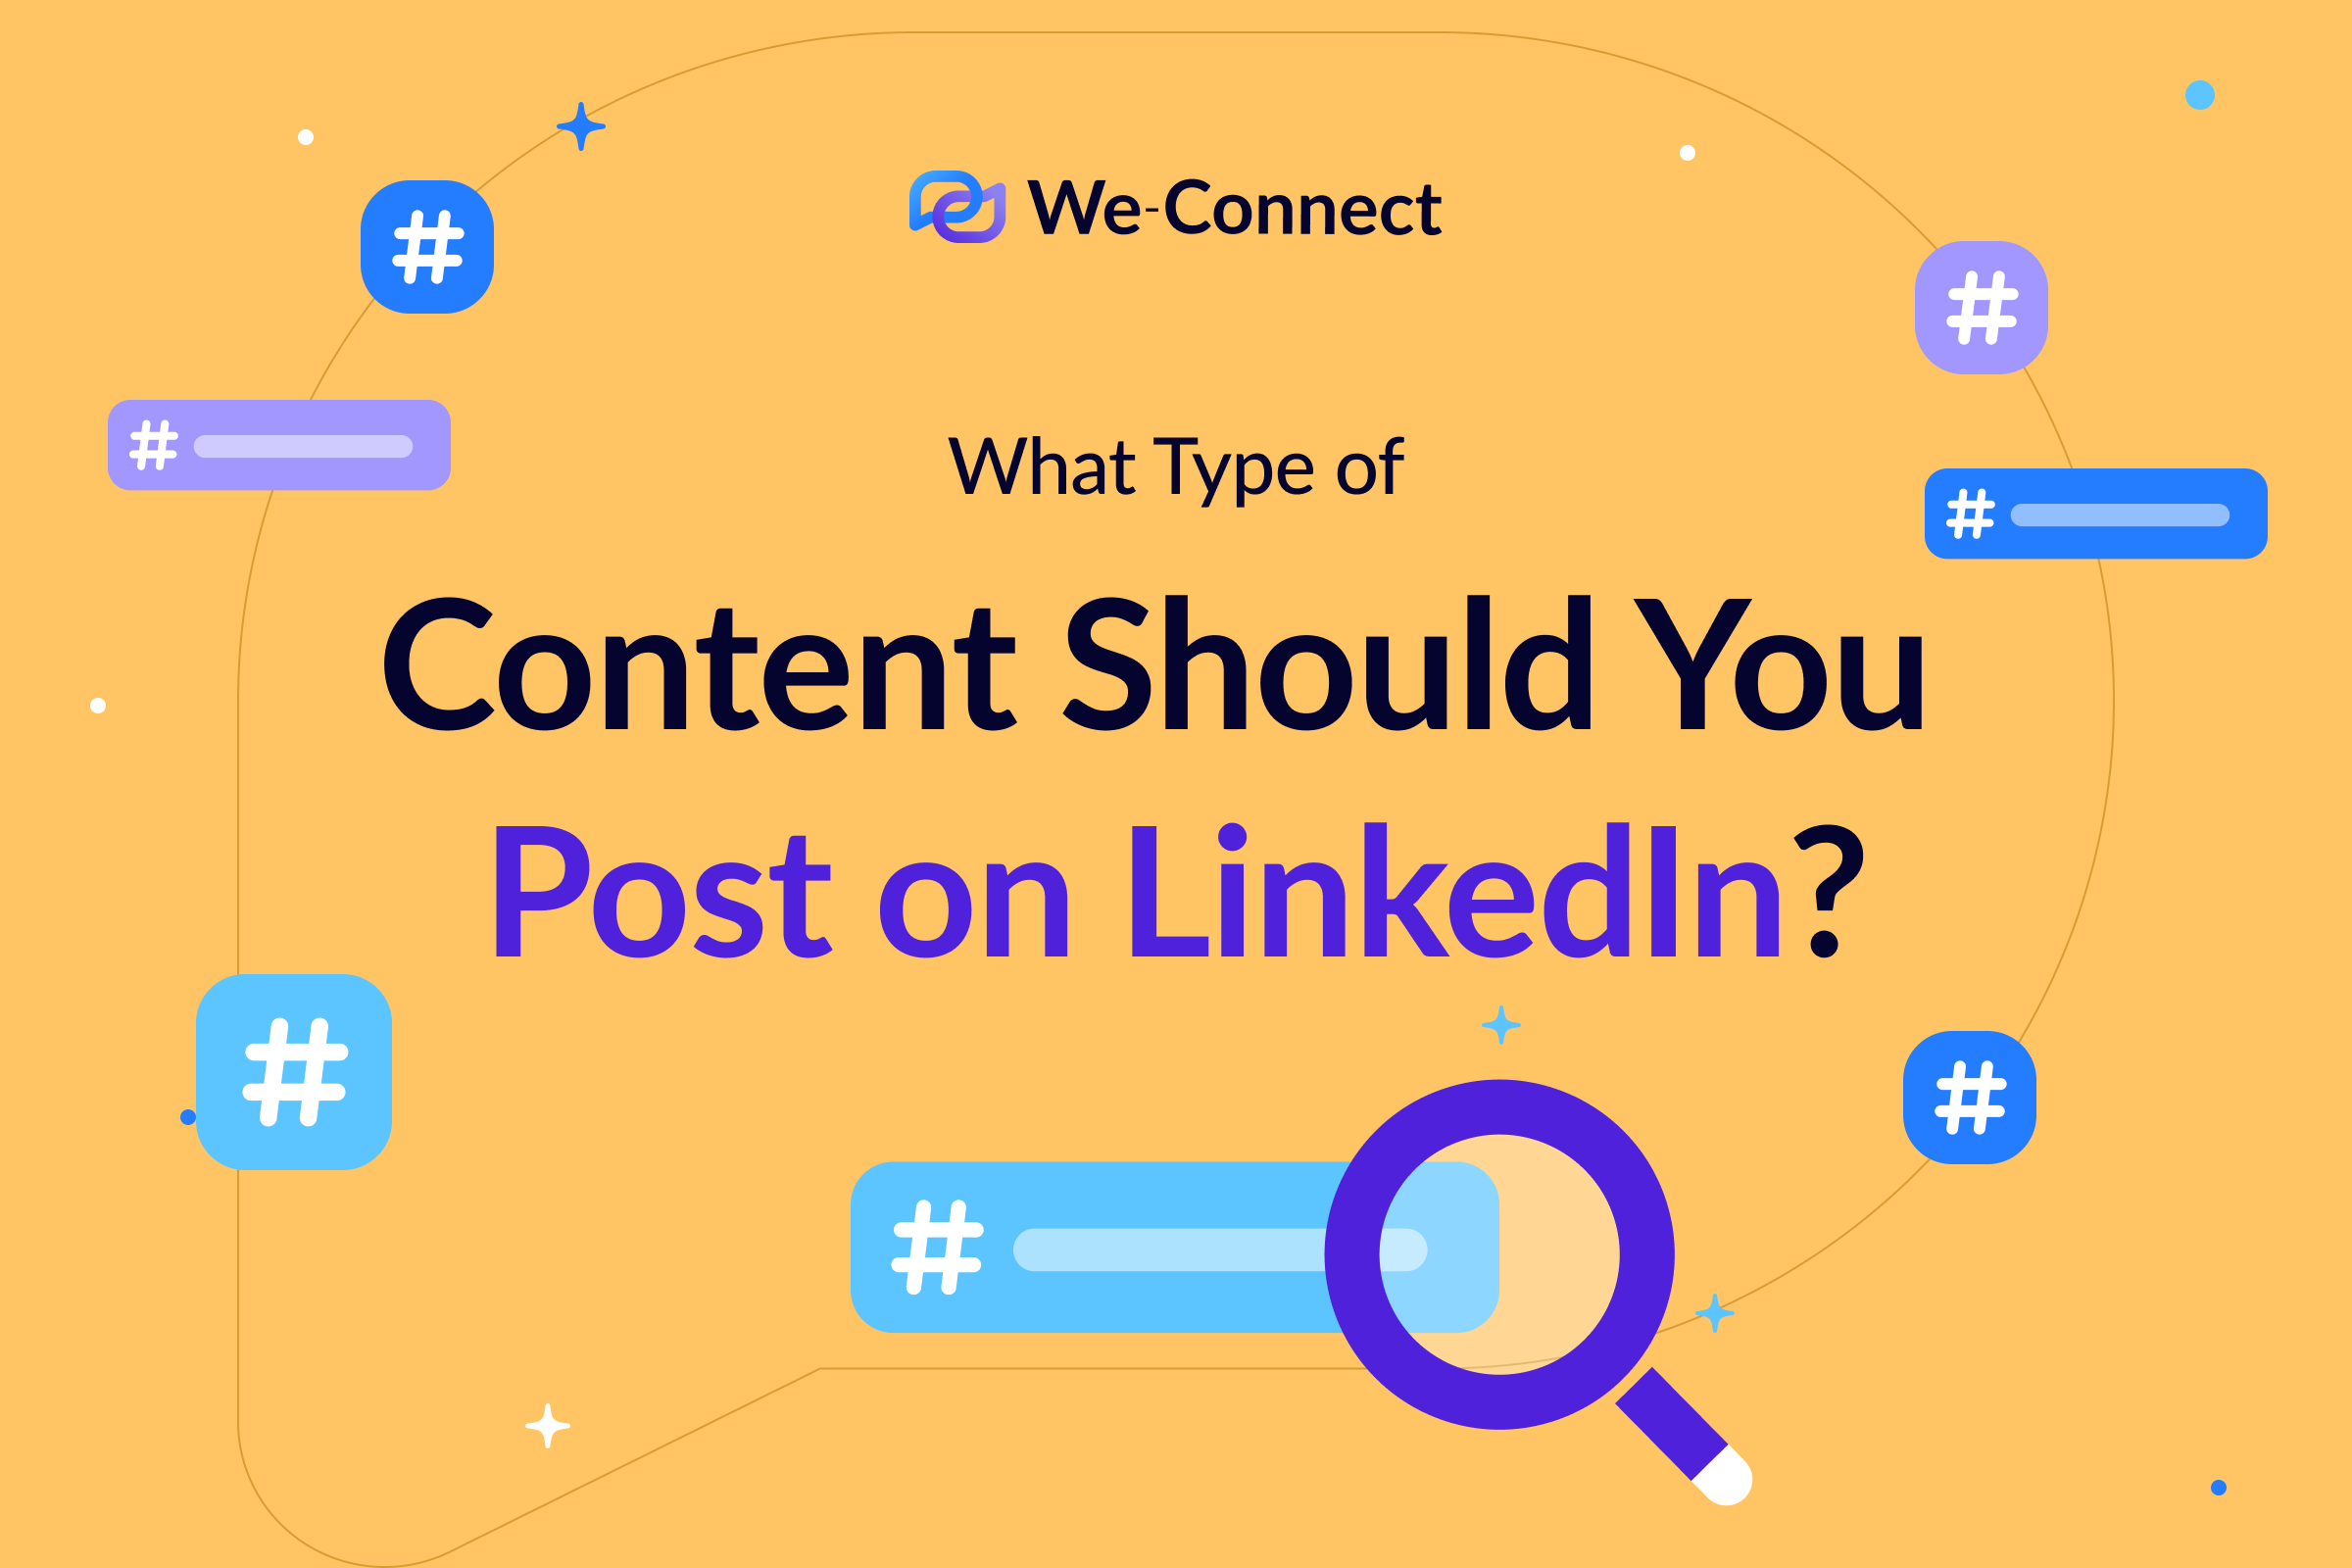 The Best Content Types For LinkedIn, According To A New Study